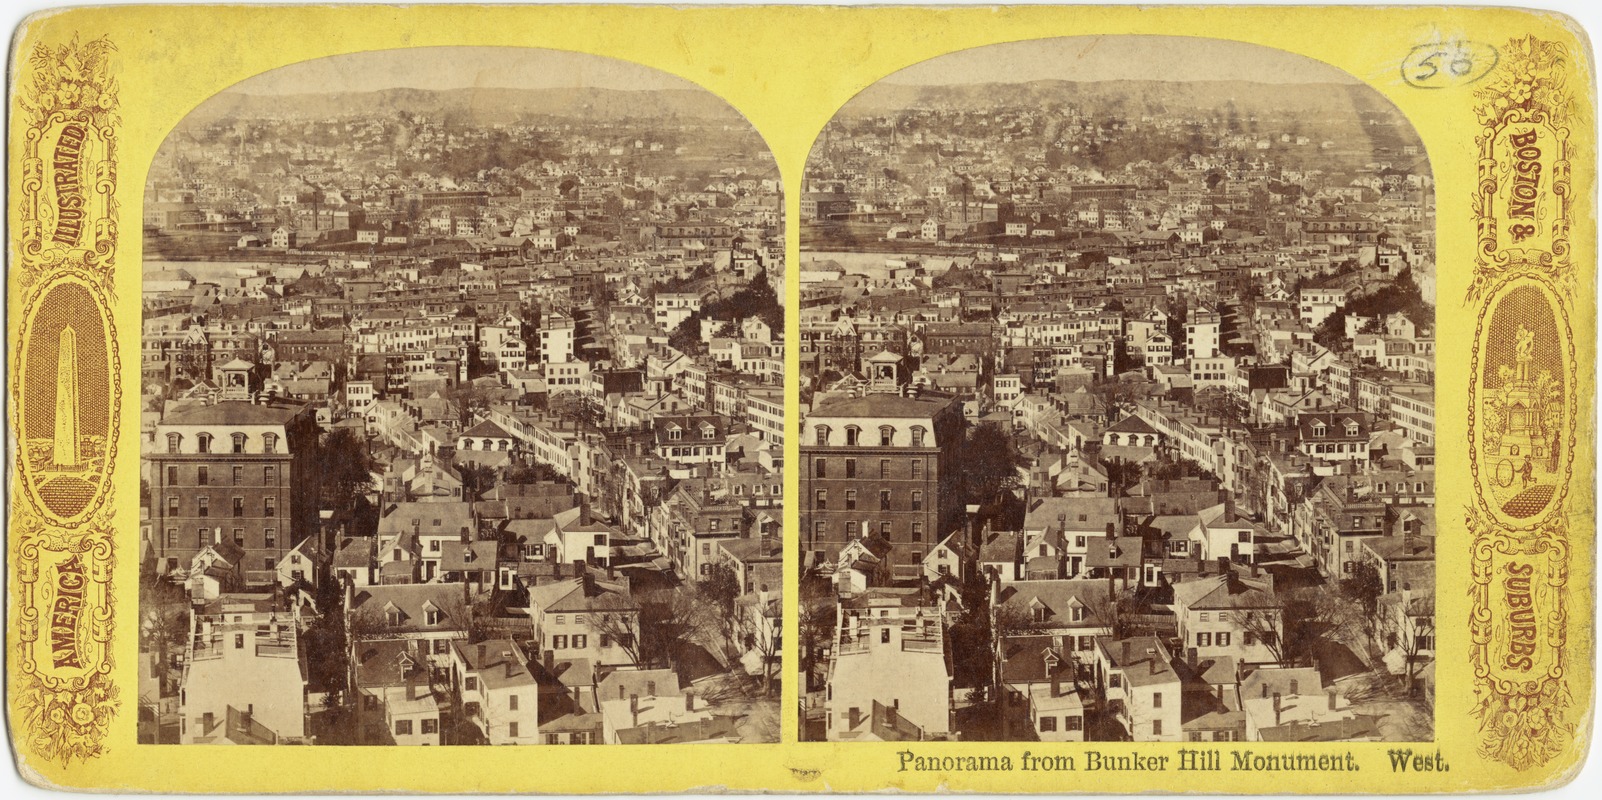 Panorama from Bunker Hill Monument, west